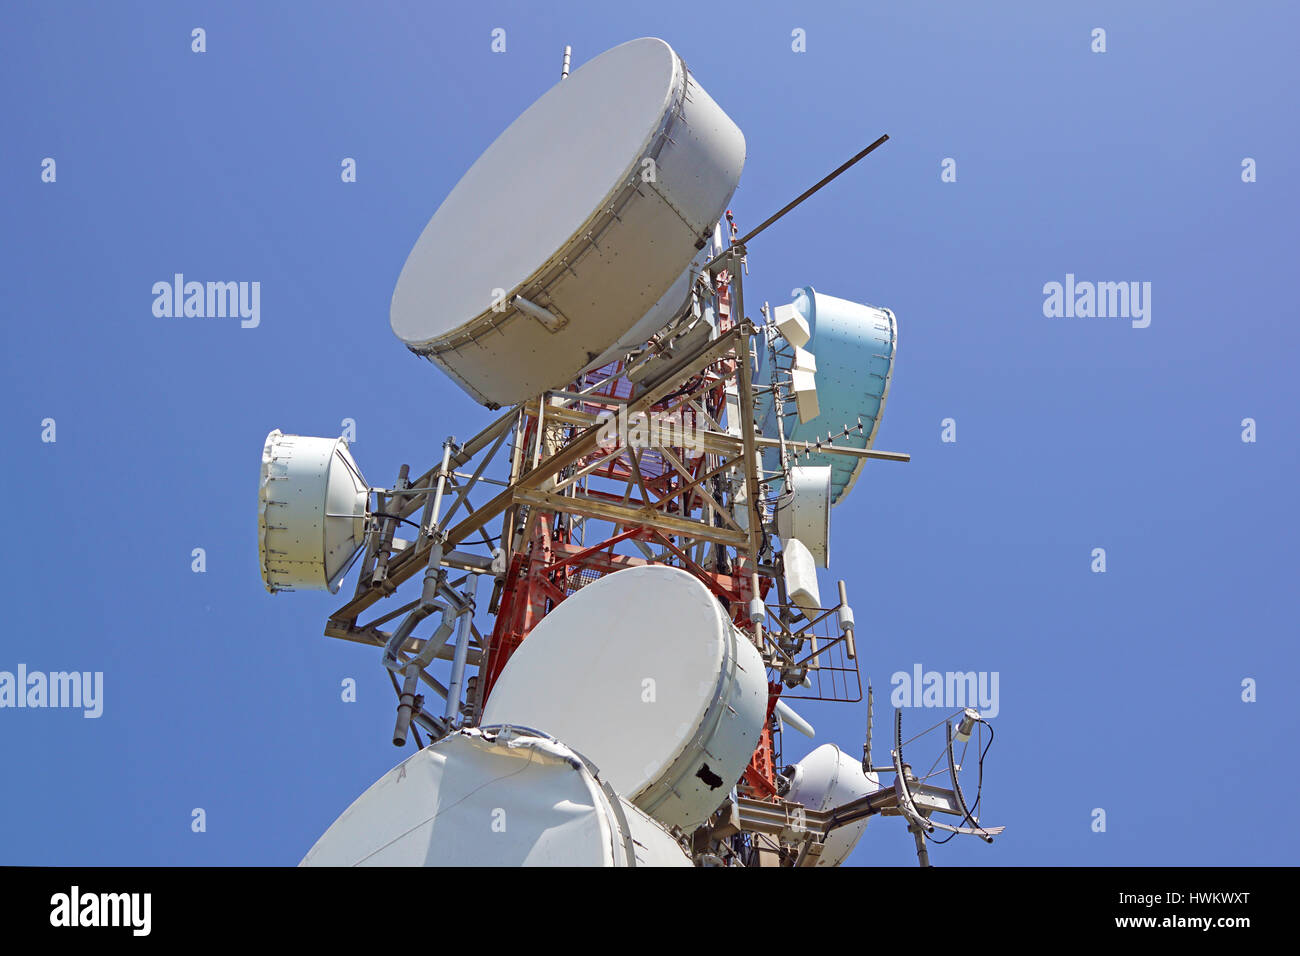 comunications antenna and telecommunications repeaters Stock Photo